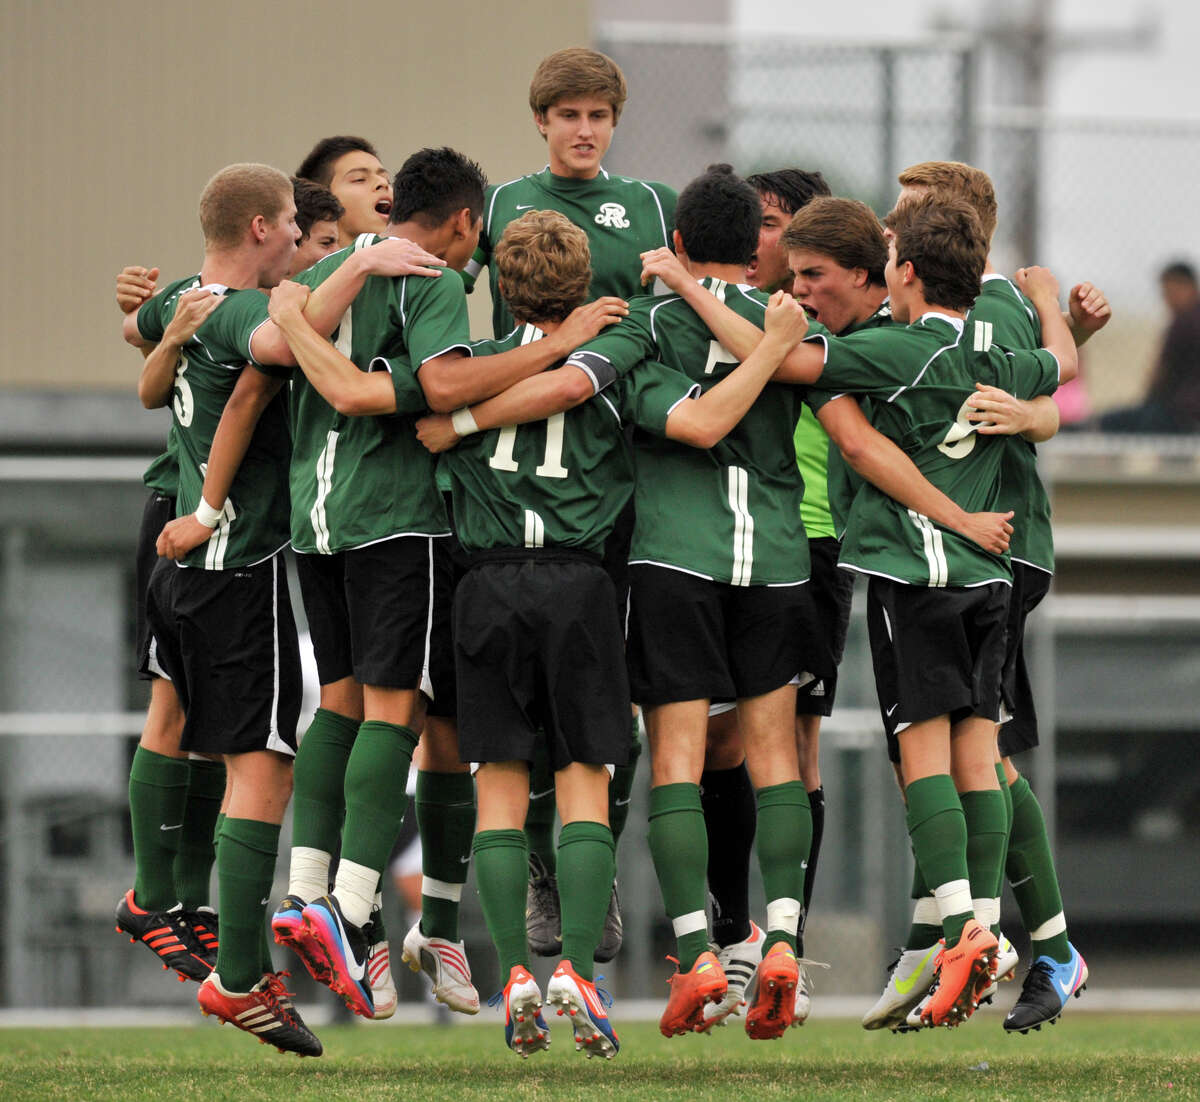 Reagan High School soccer players huddle and jump prior to the start of their District 26-5A championship game versus Churchill Tuesday evening.